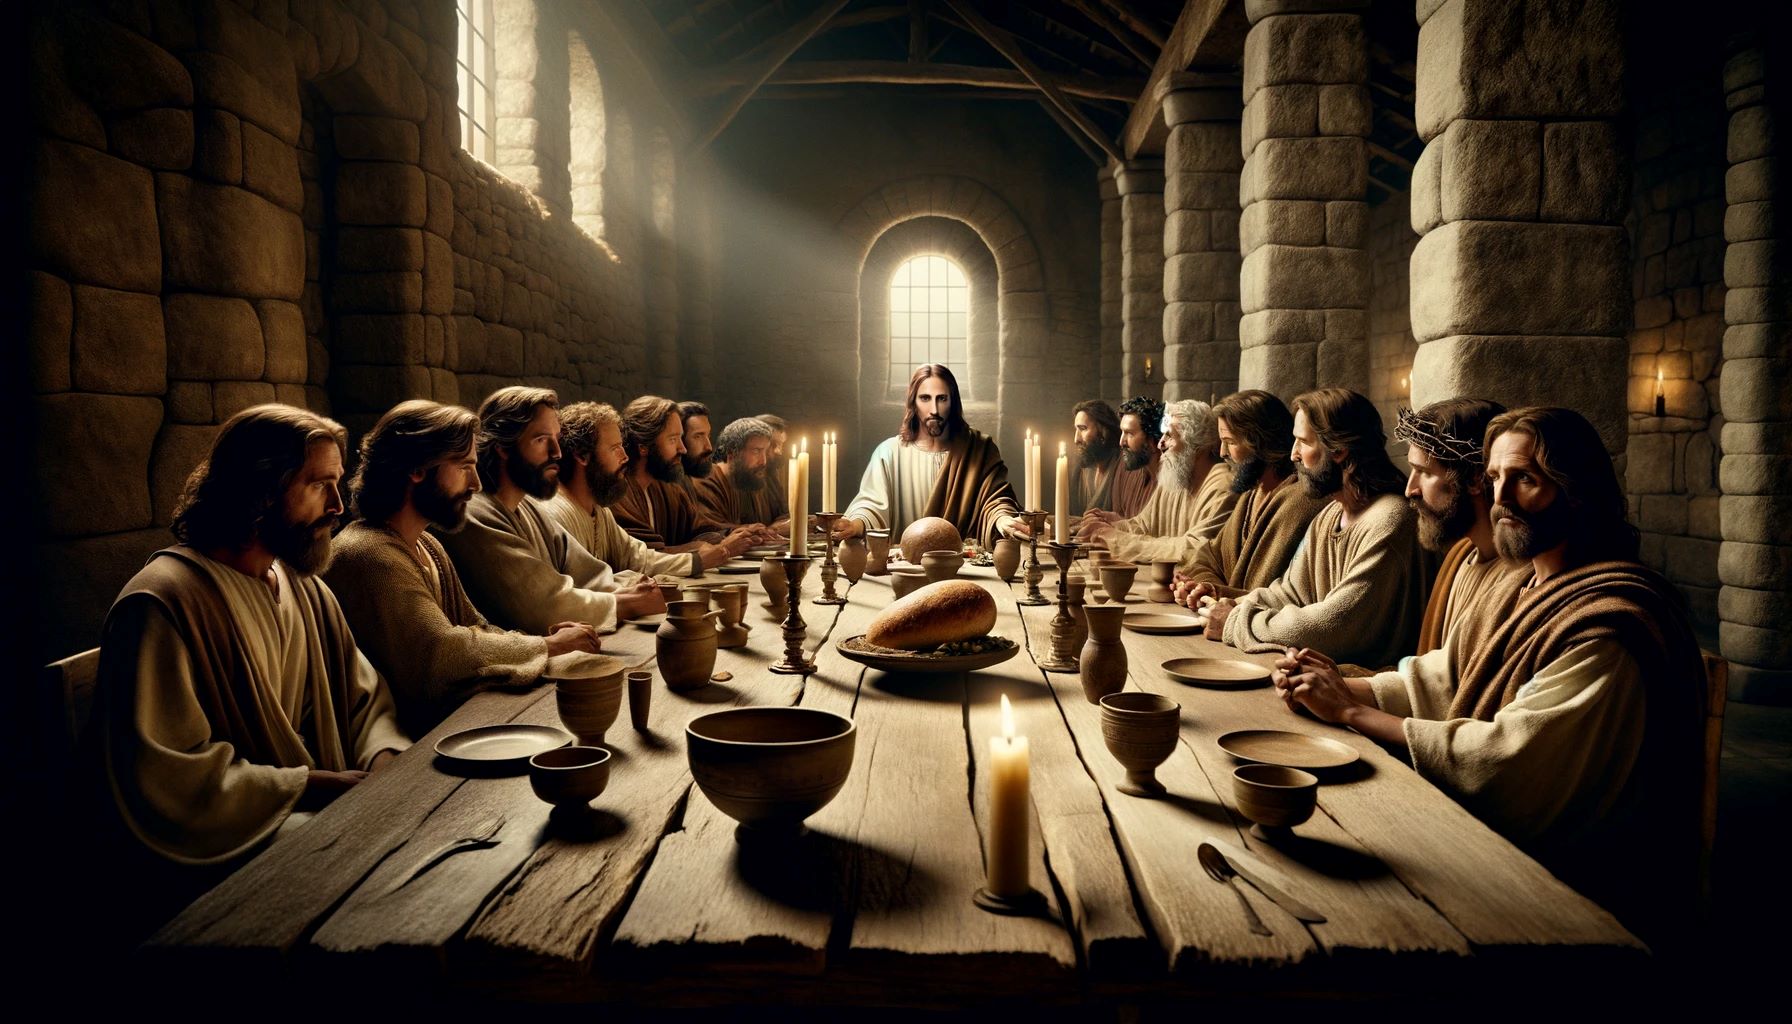 What Did Jesus Want To Eat With The Apostles